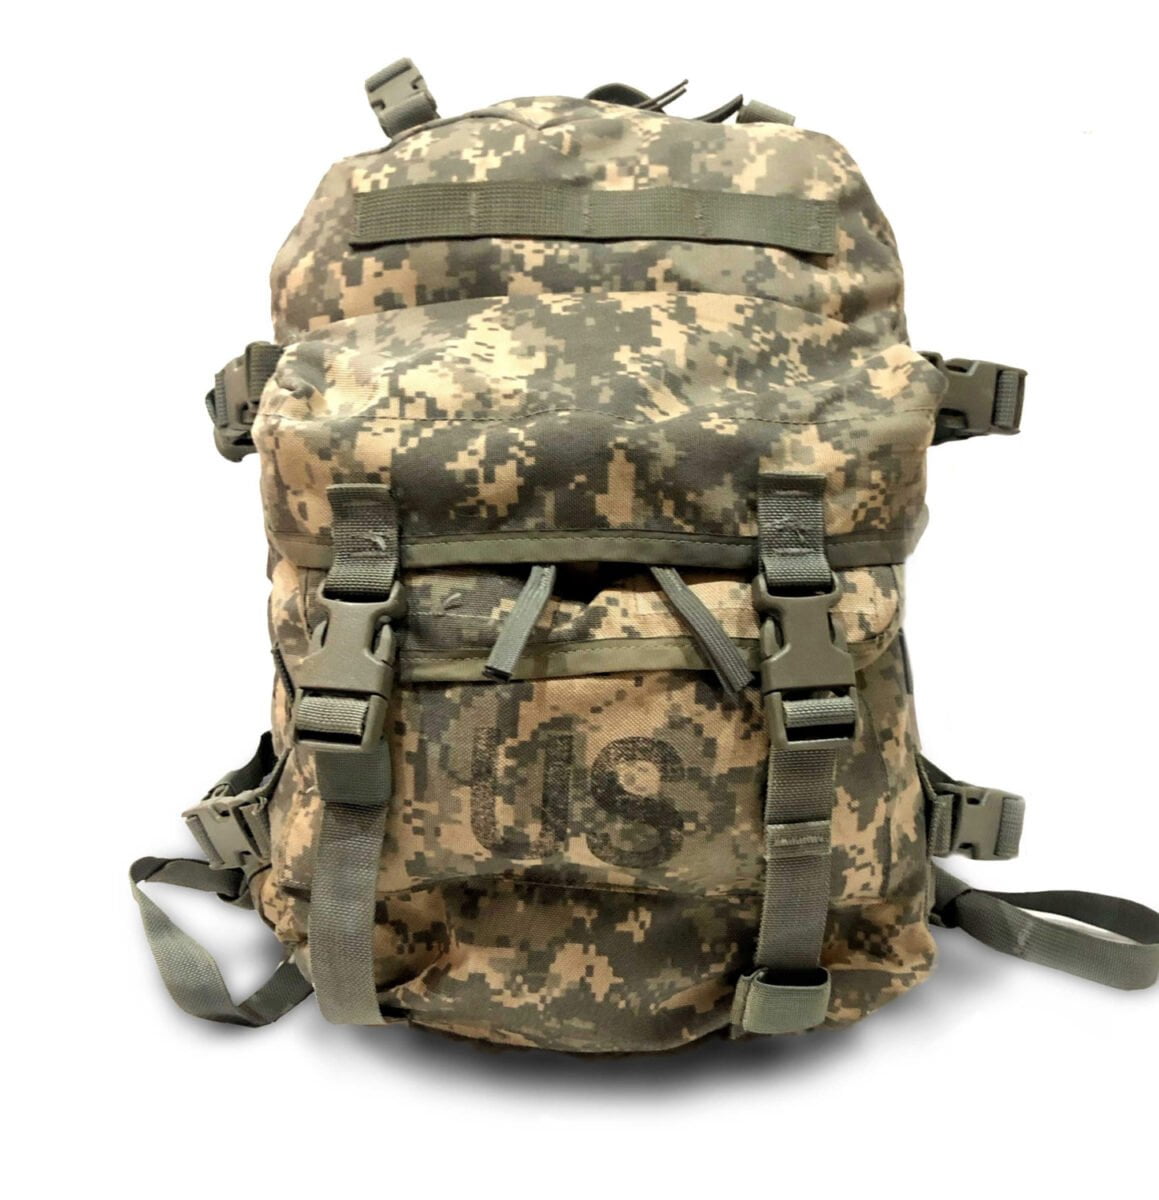 MINGPINHUIUS Small Tactical Backpack Military Army 3 Day Assault Pack  Rucksack Molle Bag Bug Out Bag for Hiking Camping Fishing (25L, Army Green)